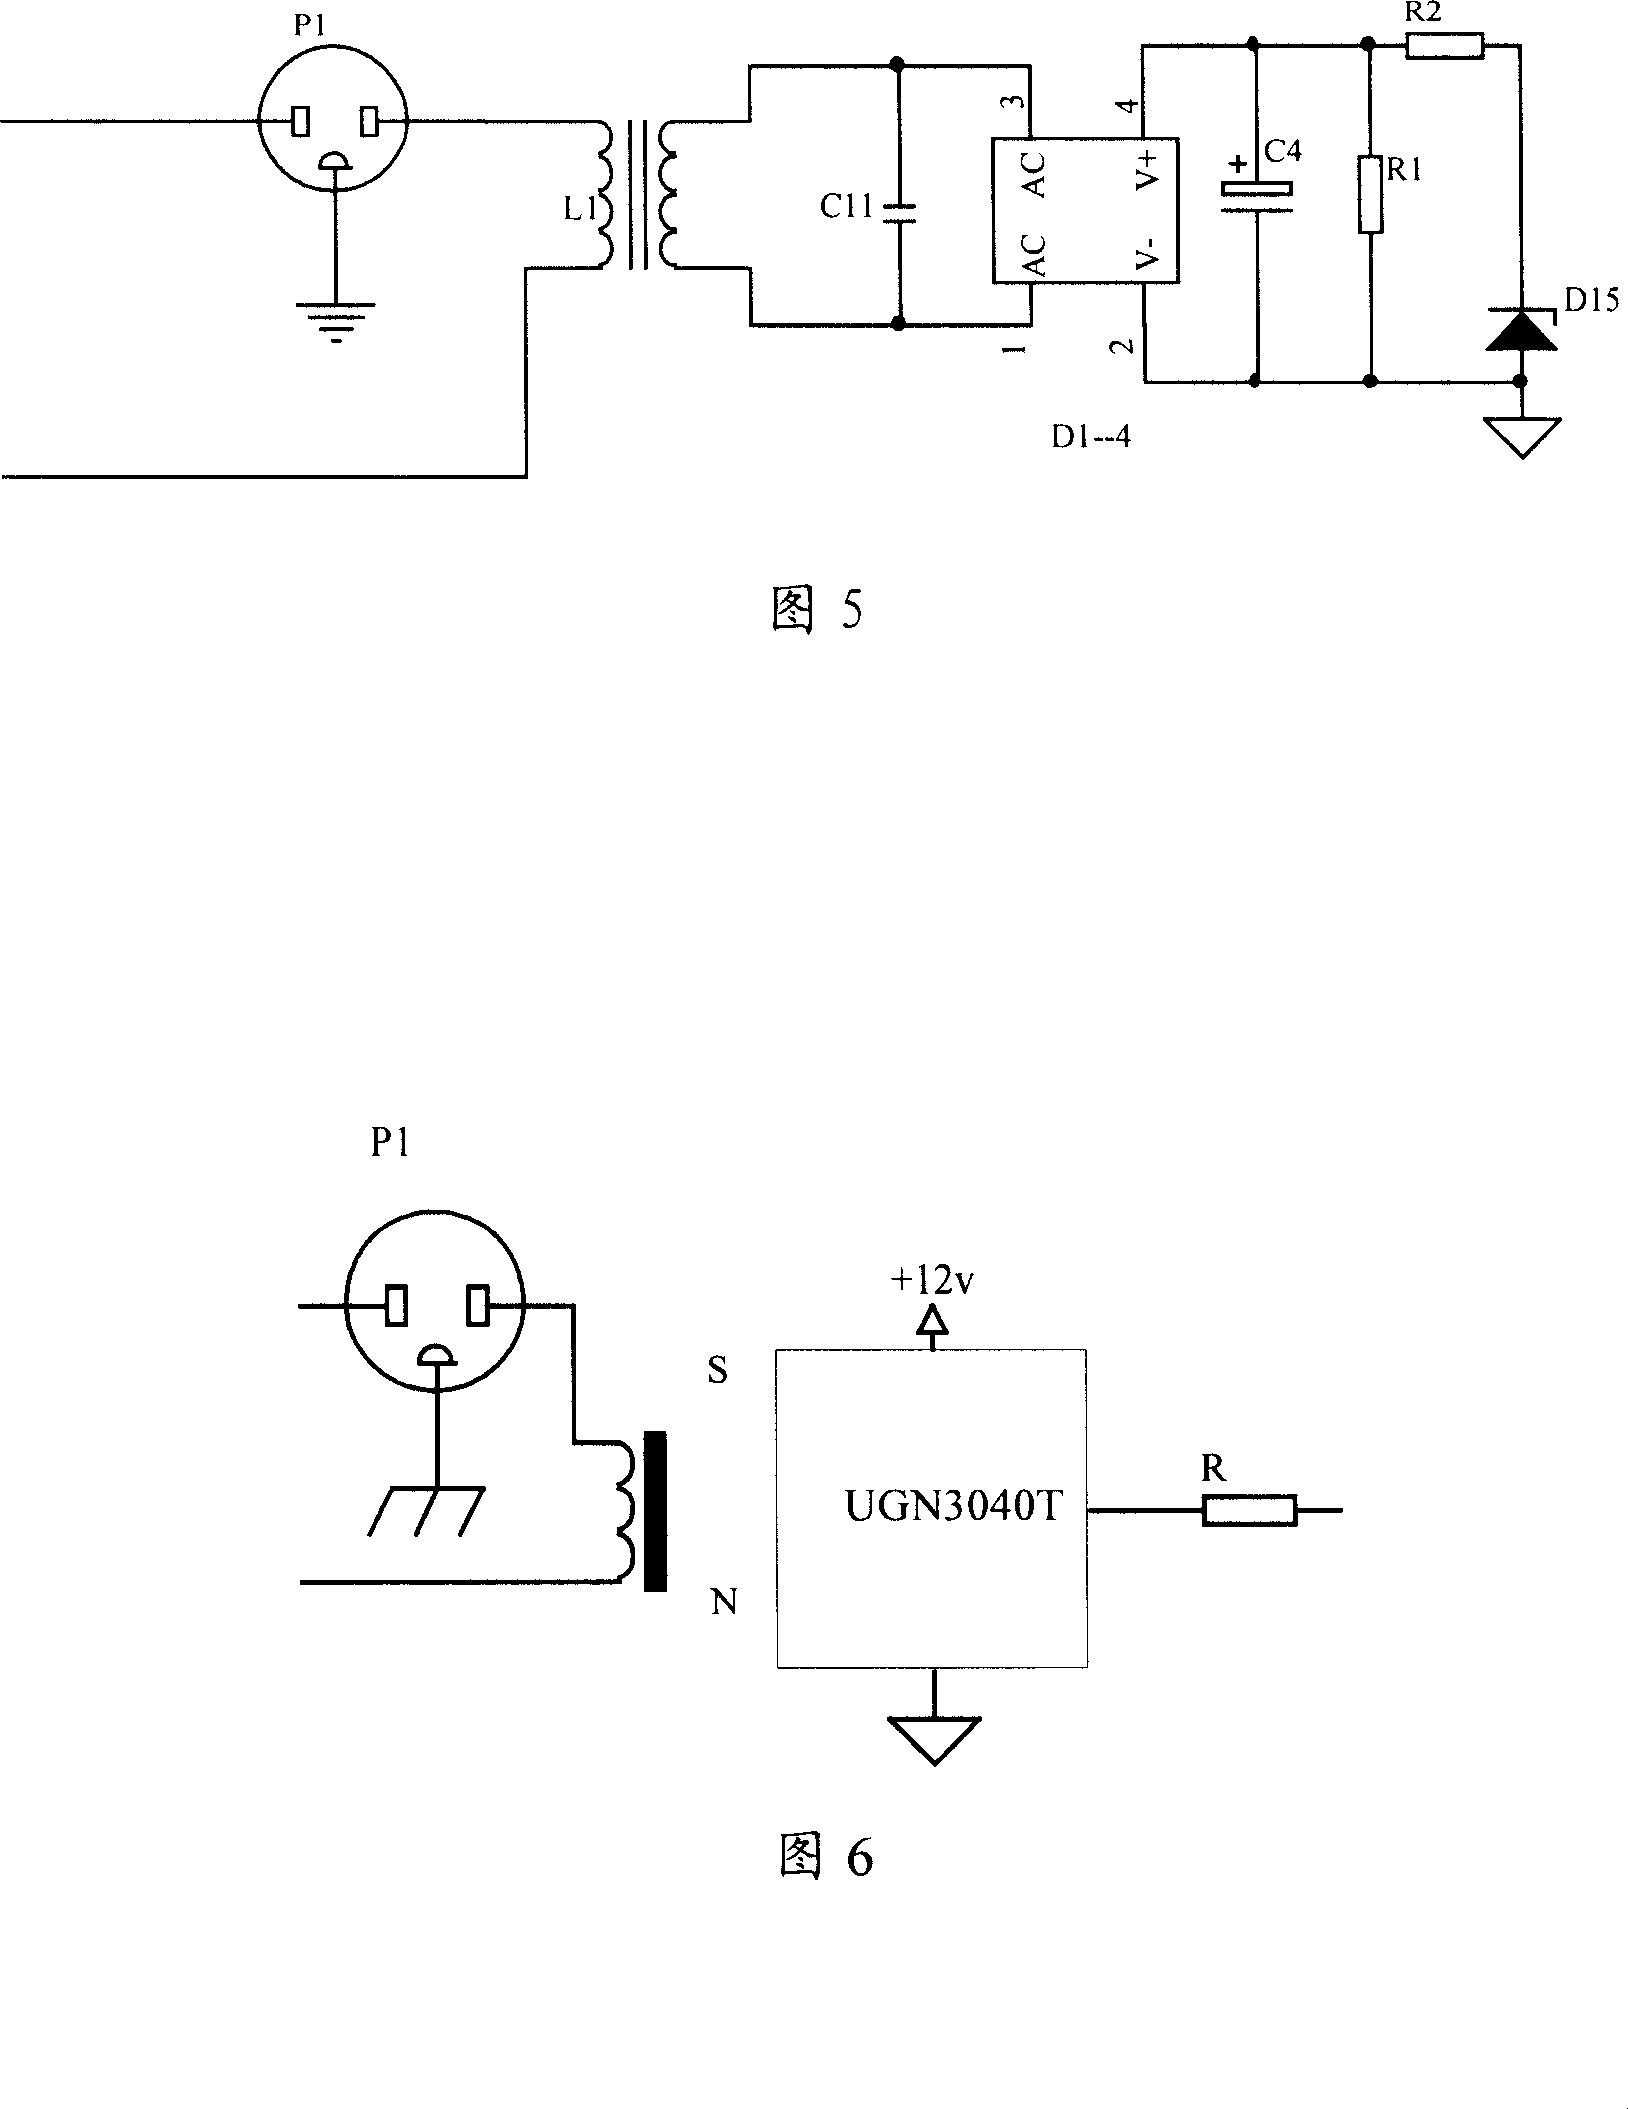 Electrical measurement-based control switch and switch control socket